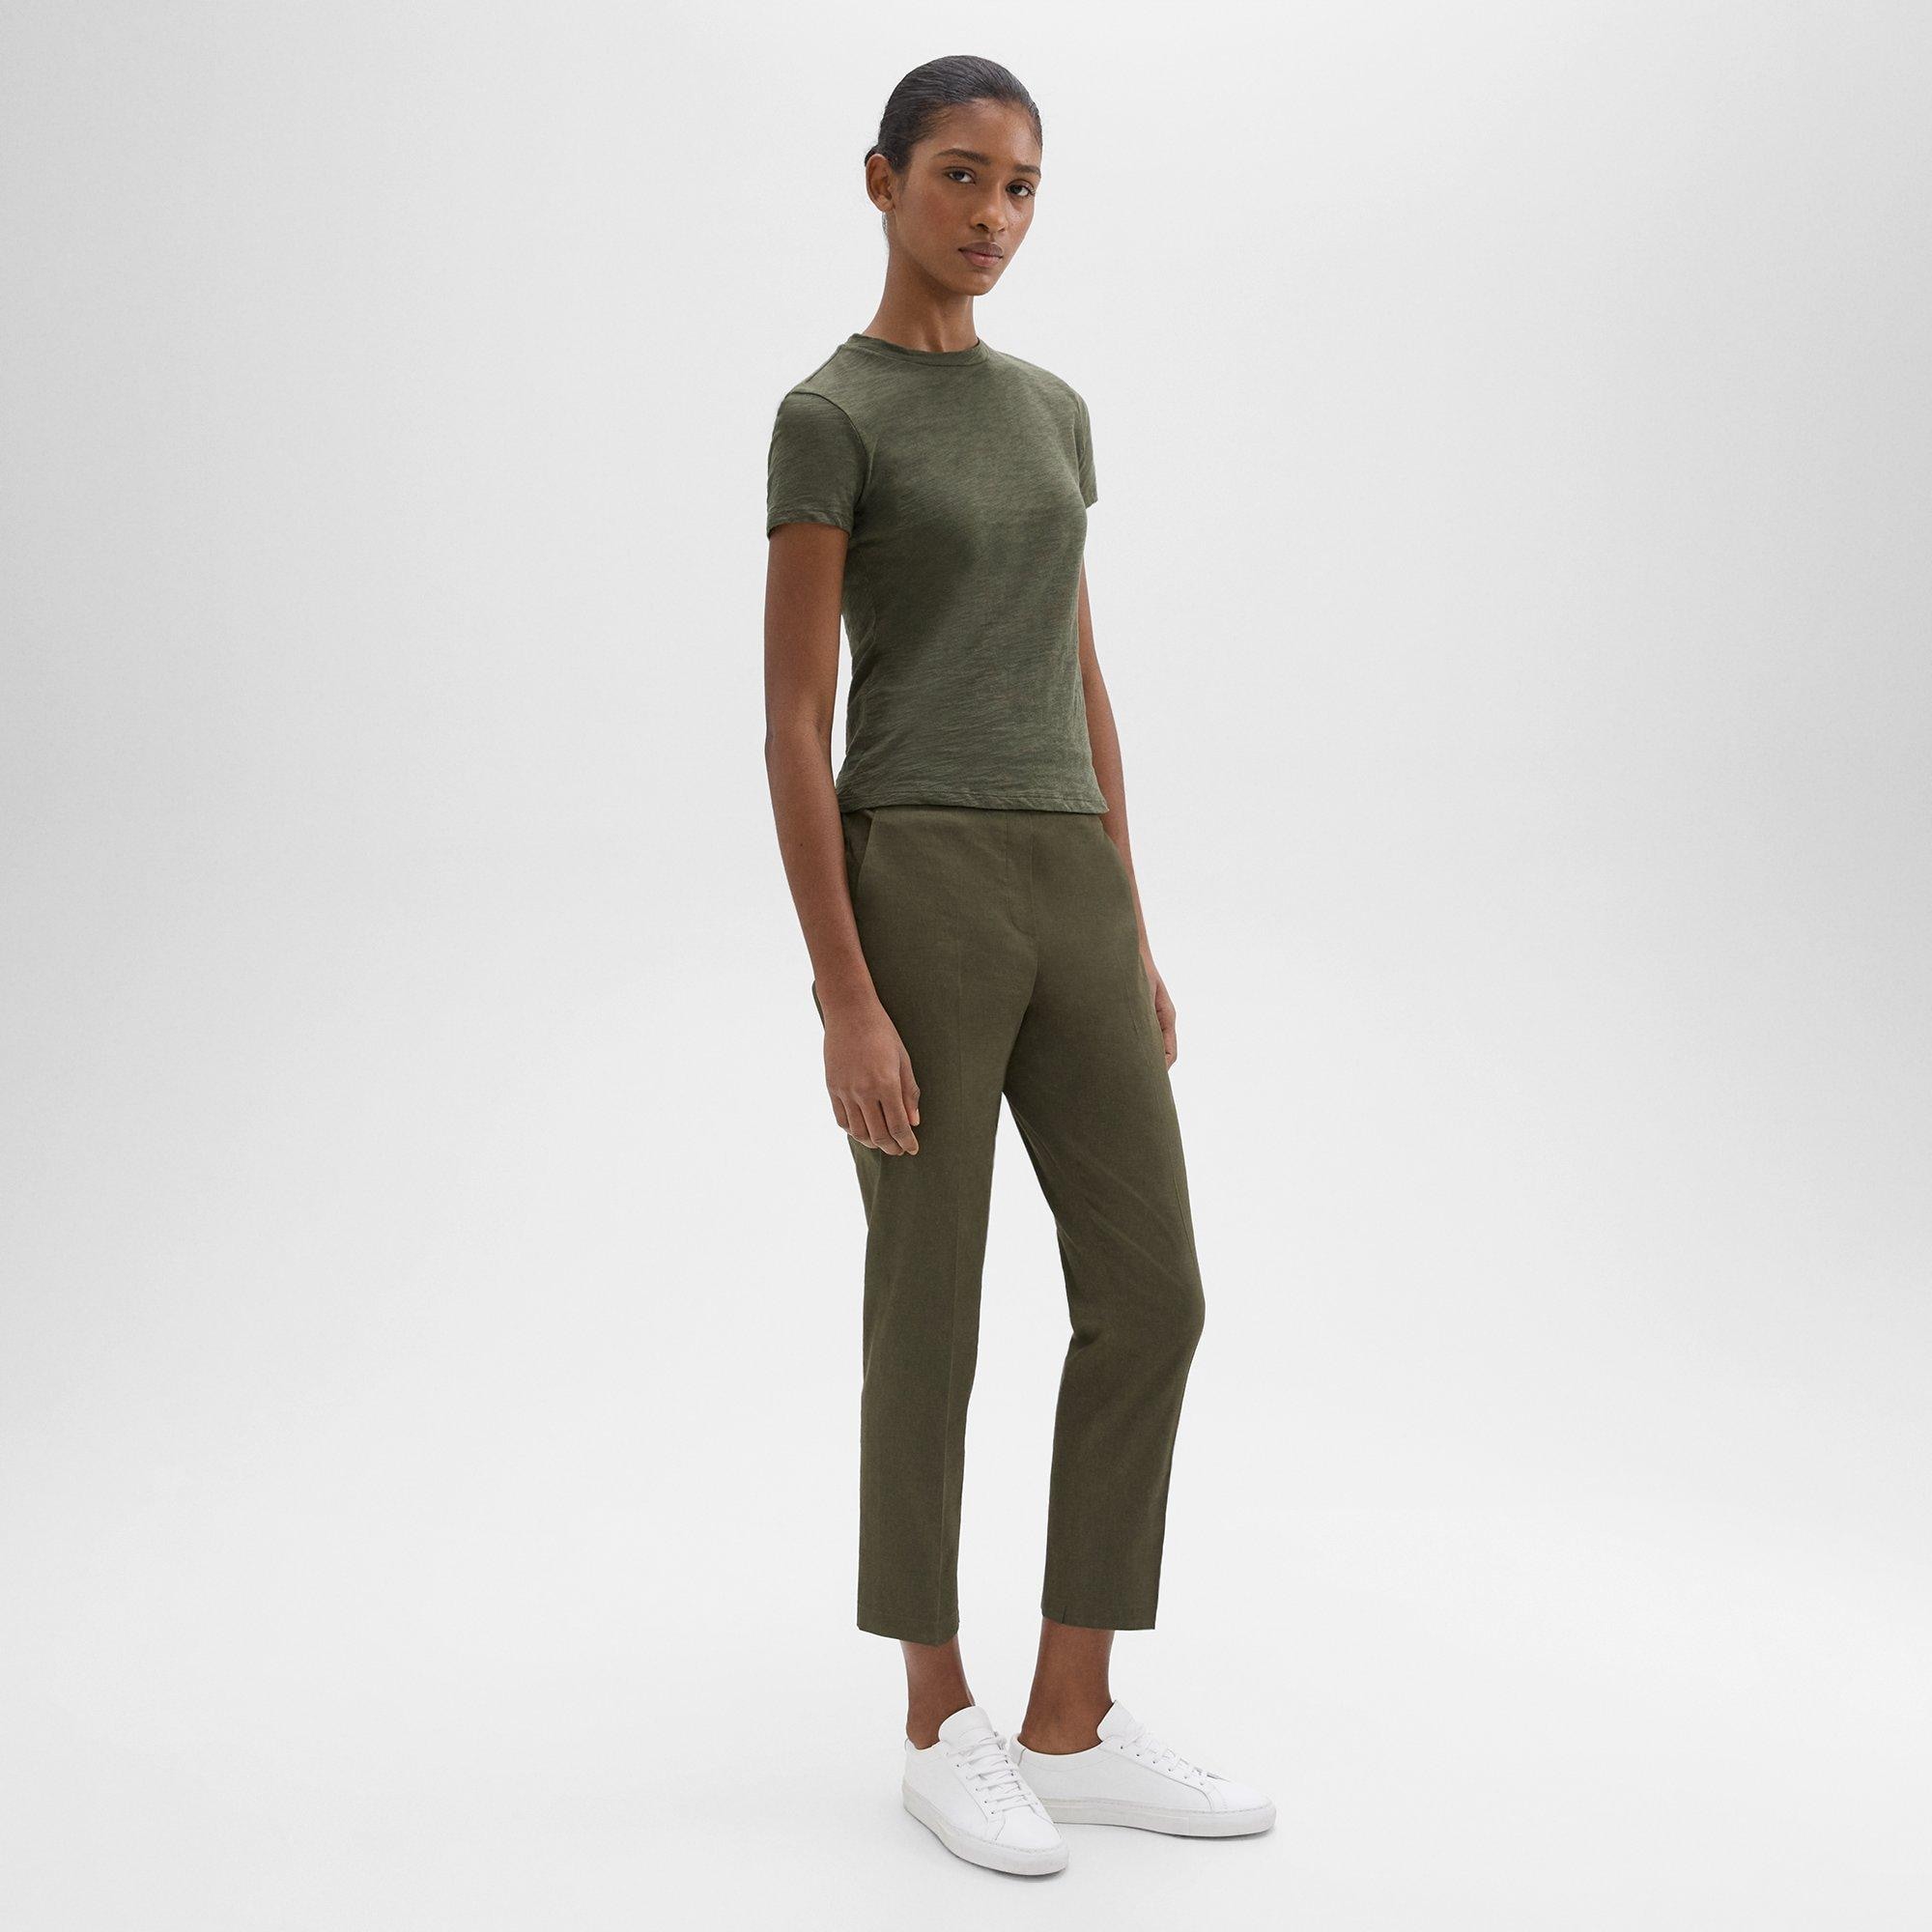 Lucky Brand olive green cropped pants Size 25 - $26 - From Erika